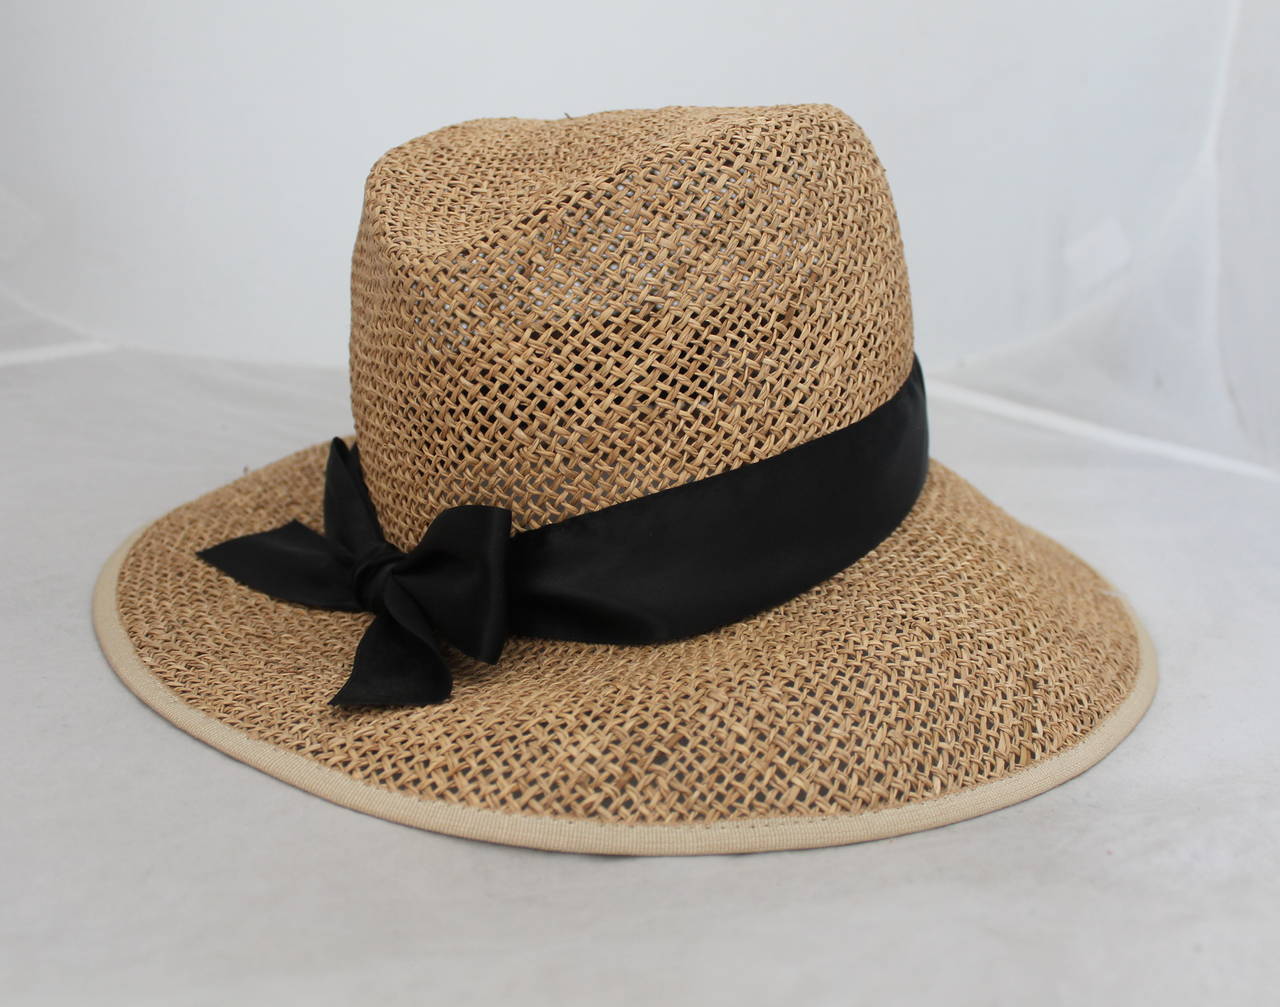 Sonia Rykiel beige straw hat with black ribbon detail. Hat is in excellent condition. Brim on hat is 3.5